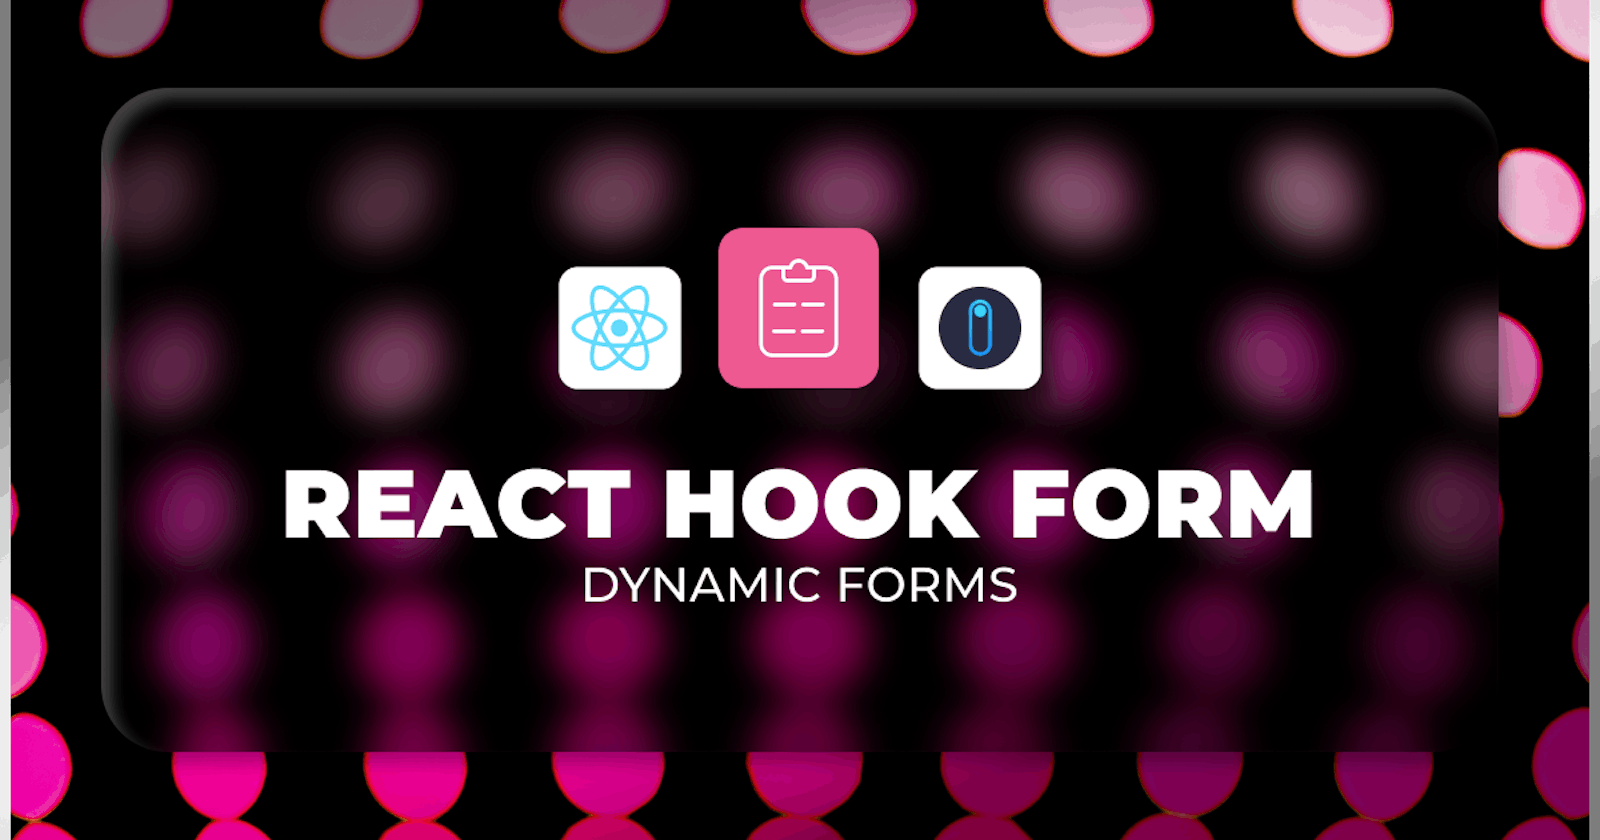 Dynamic Forms with React Hook Form